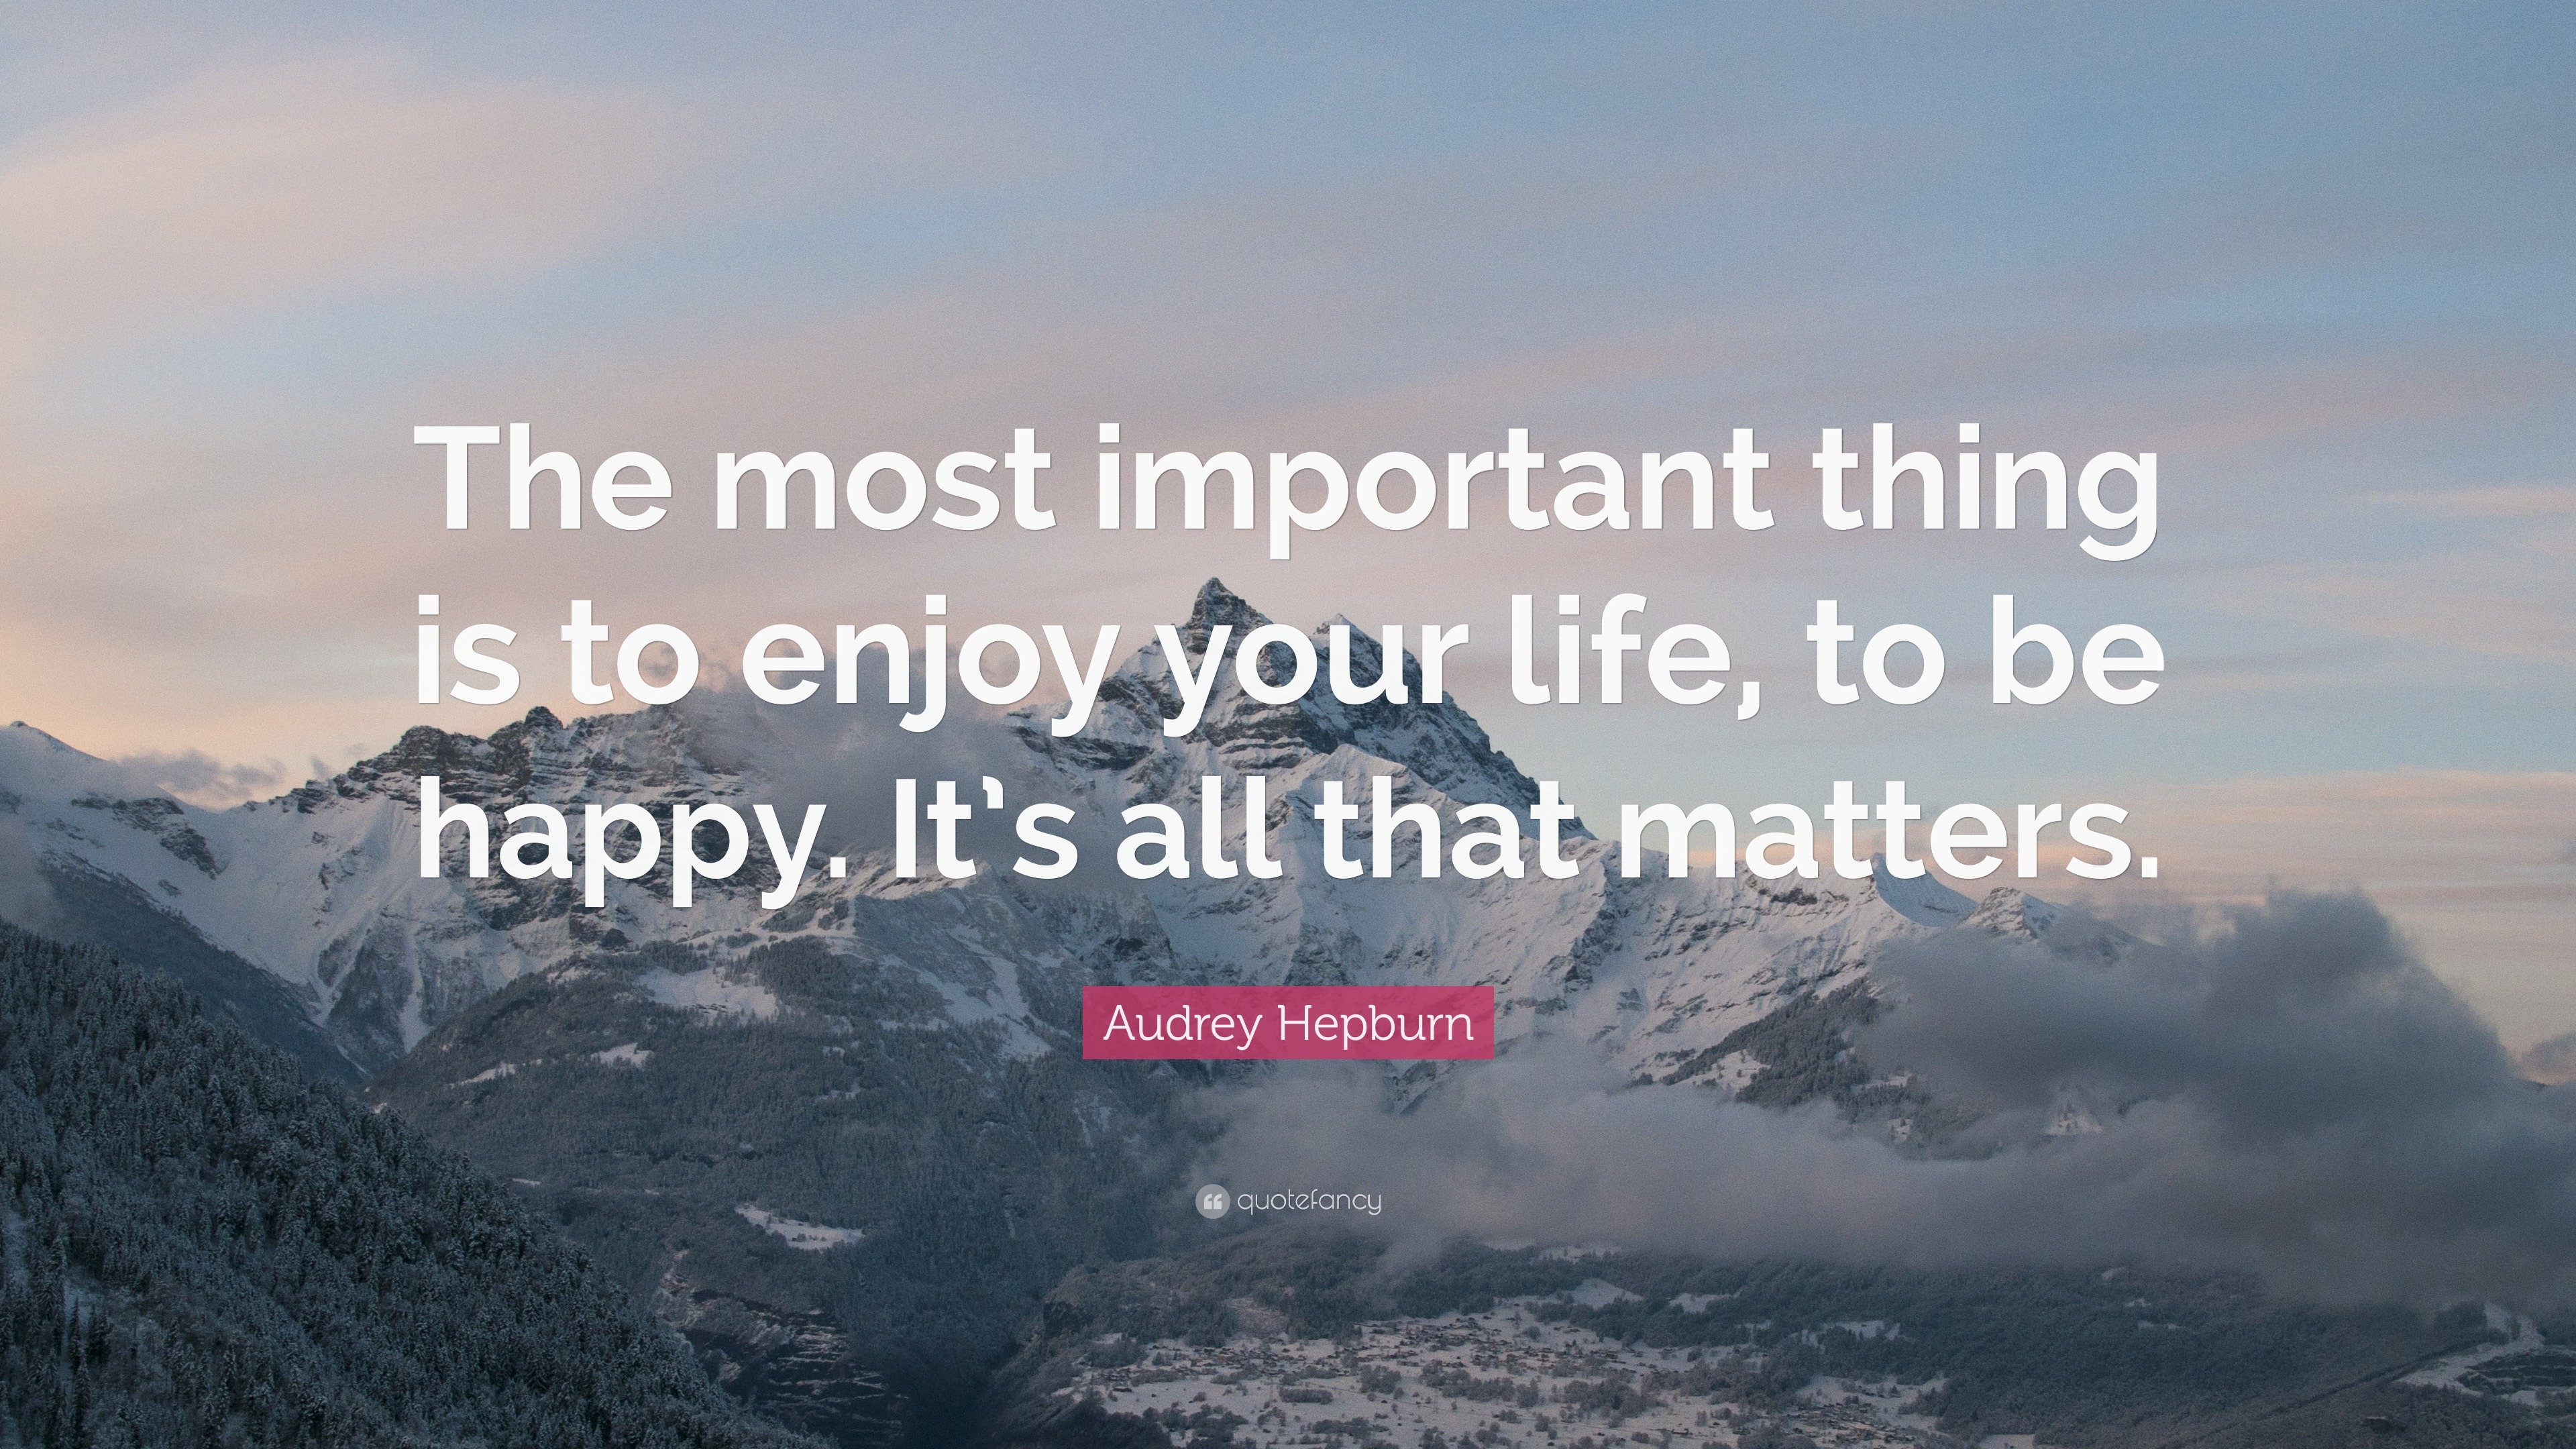 Audrey Hepburn Quote “The most important thing is to enjoy your life to